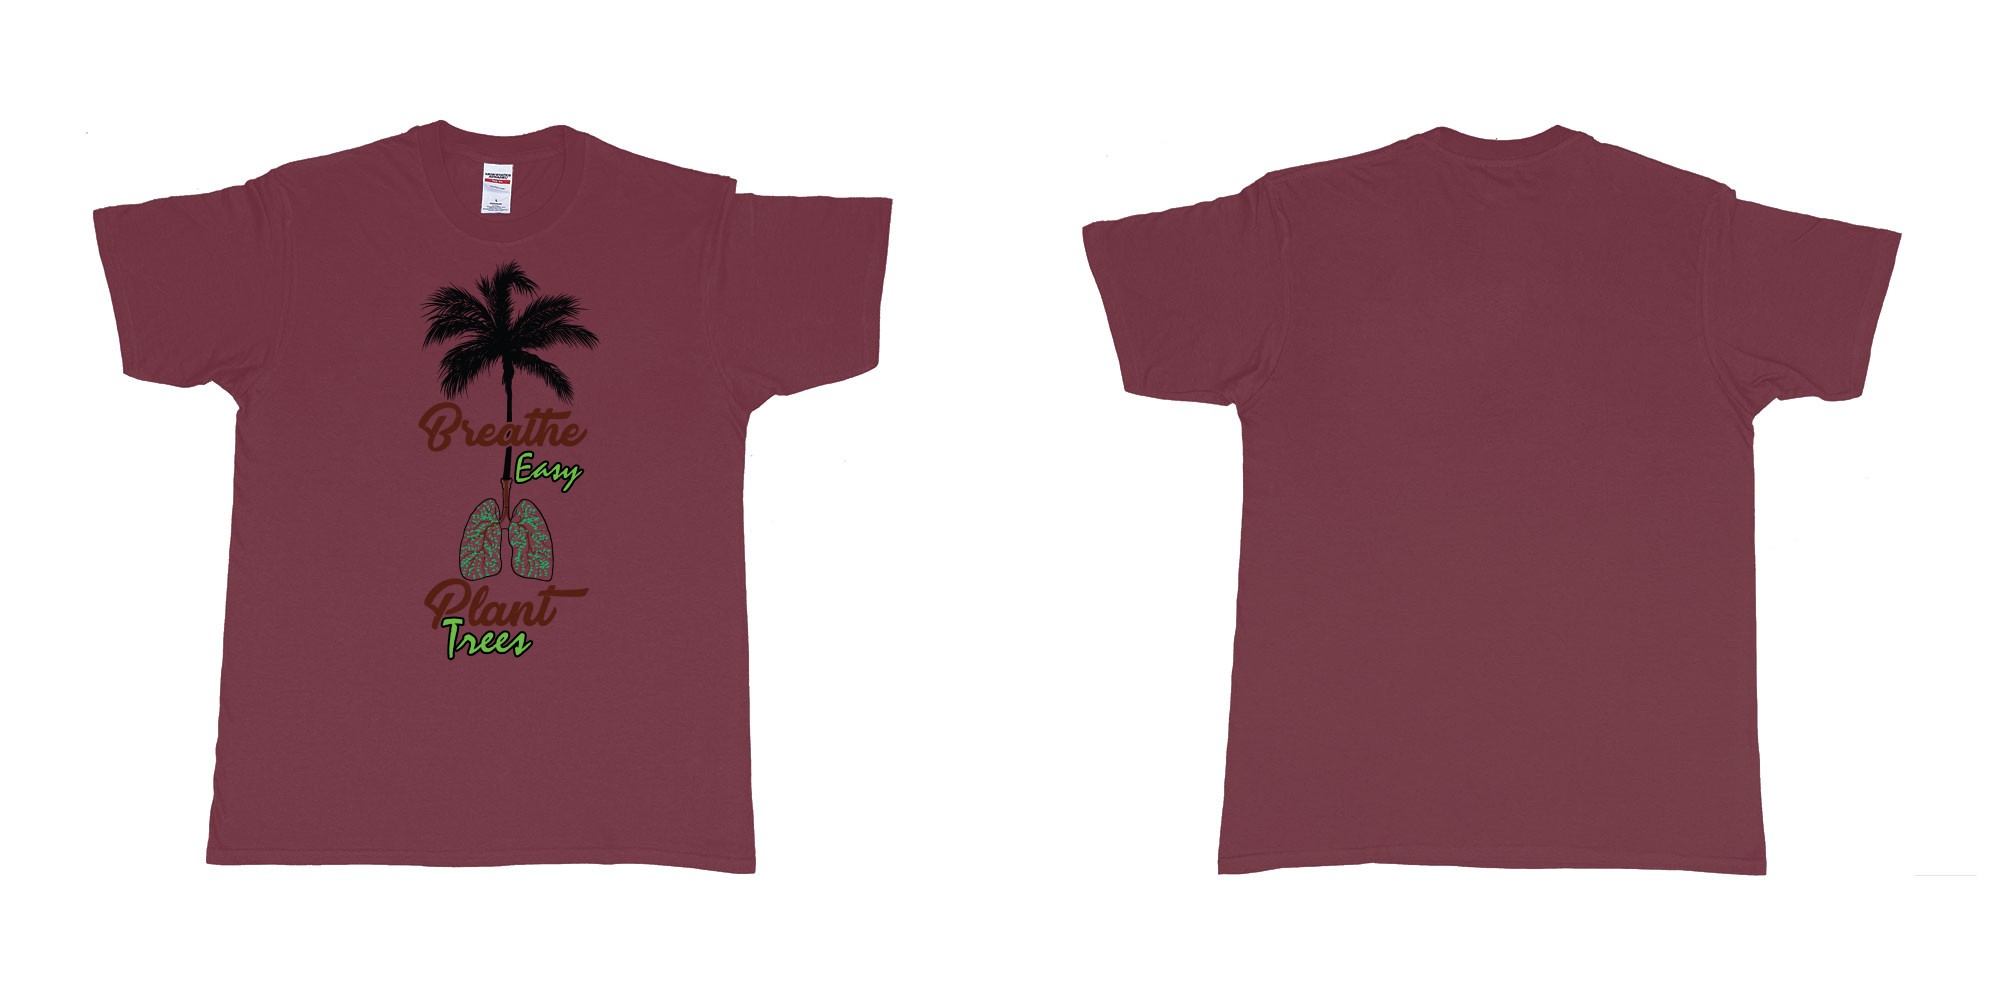 Custom tshirt design breathe easy and plant a tree for better air for everyone in fabric color marron choice your own text made in Bali by The Pirate Way